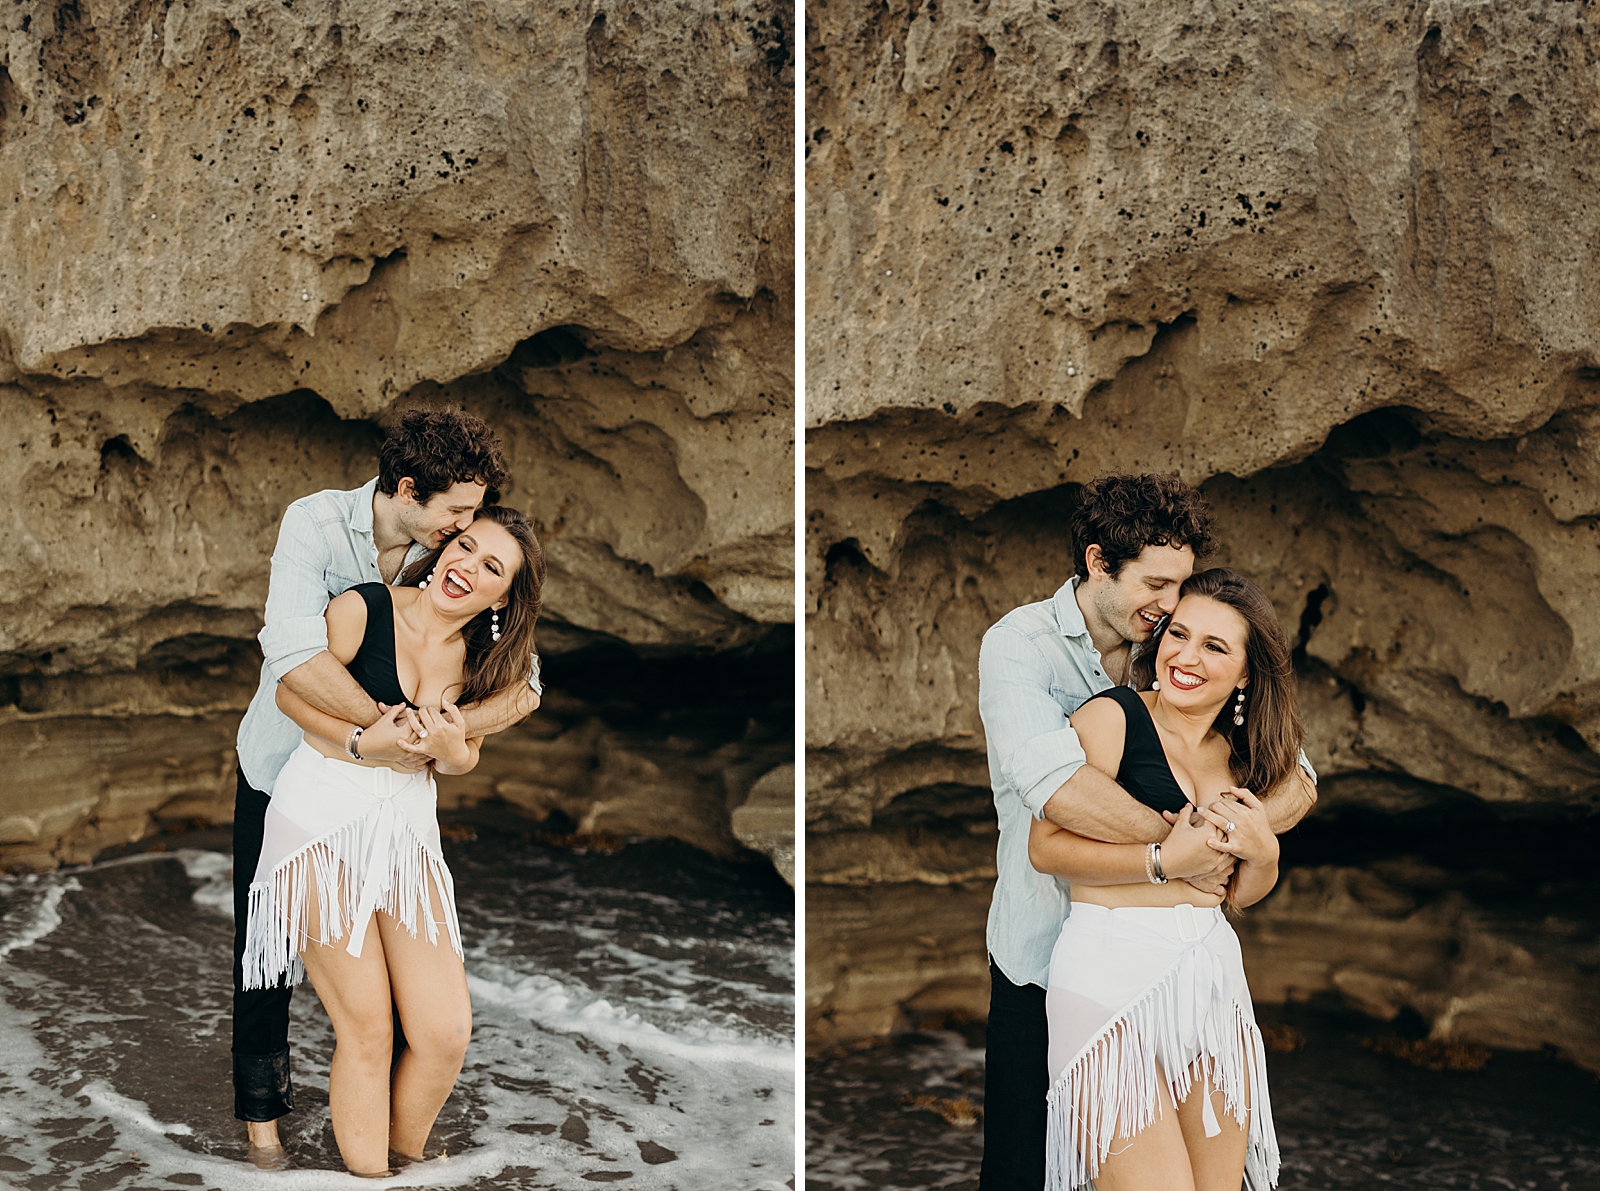 Man holding woman from behind and nuzzling side of her forehead next to naturally rock formation by the wet sand